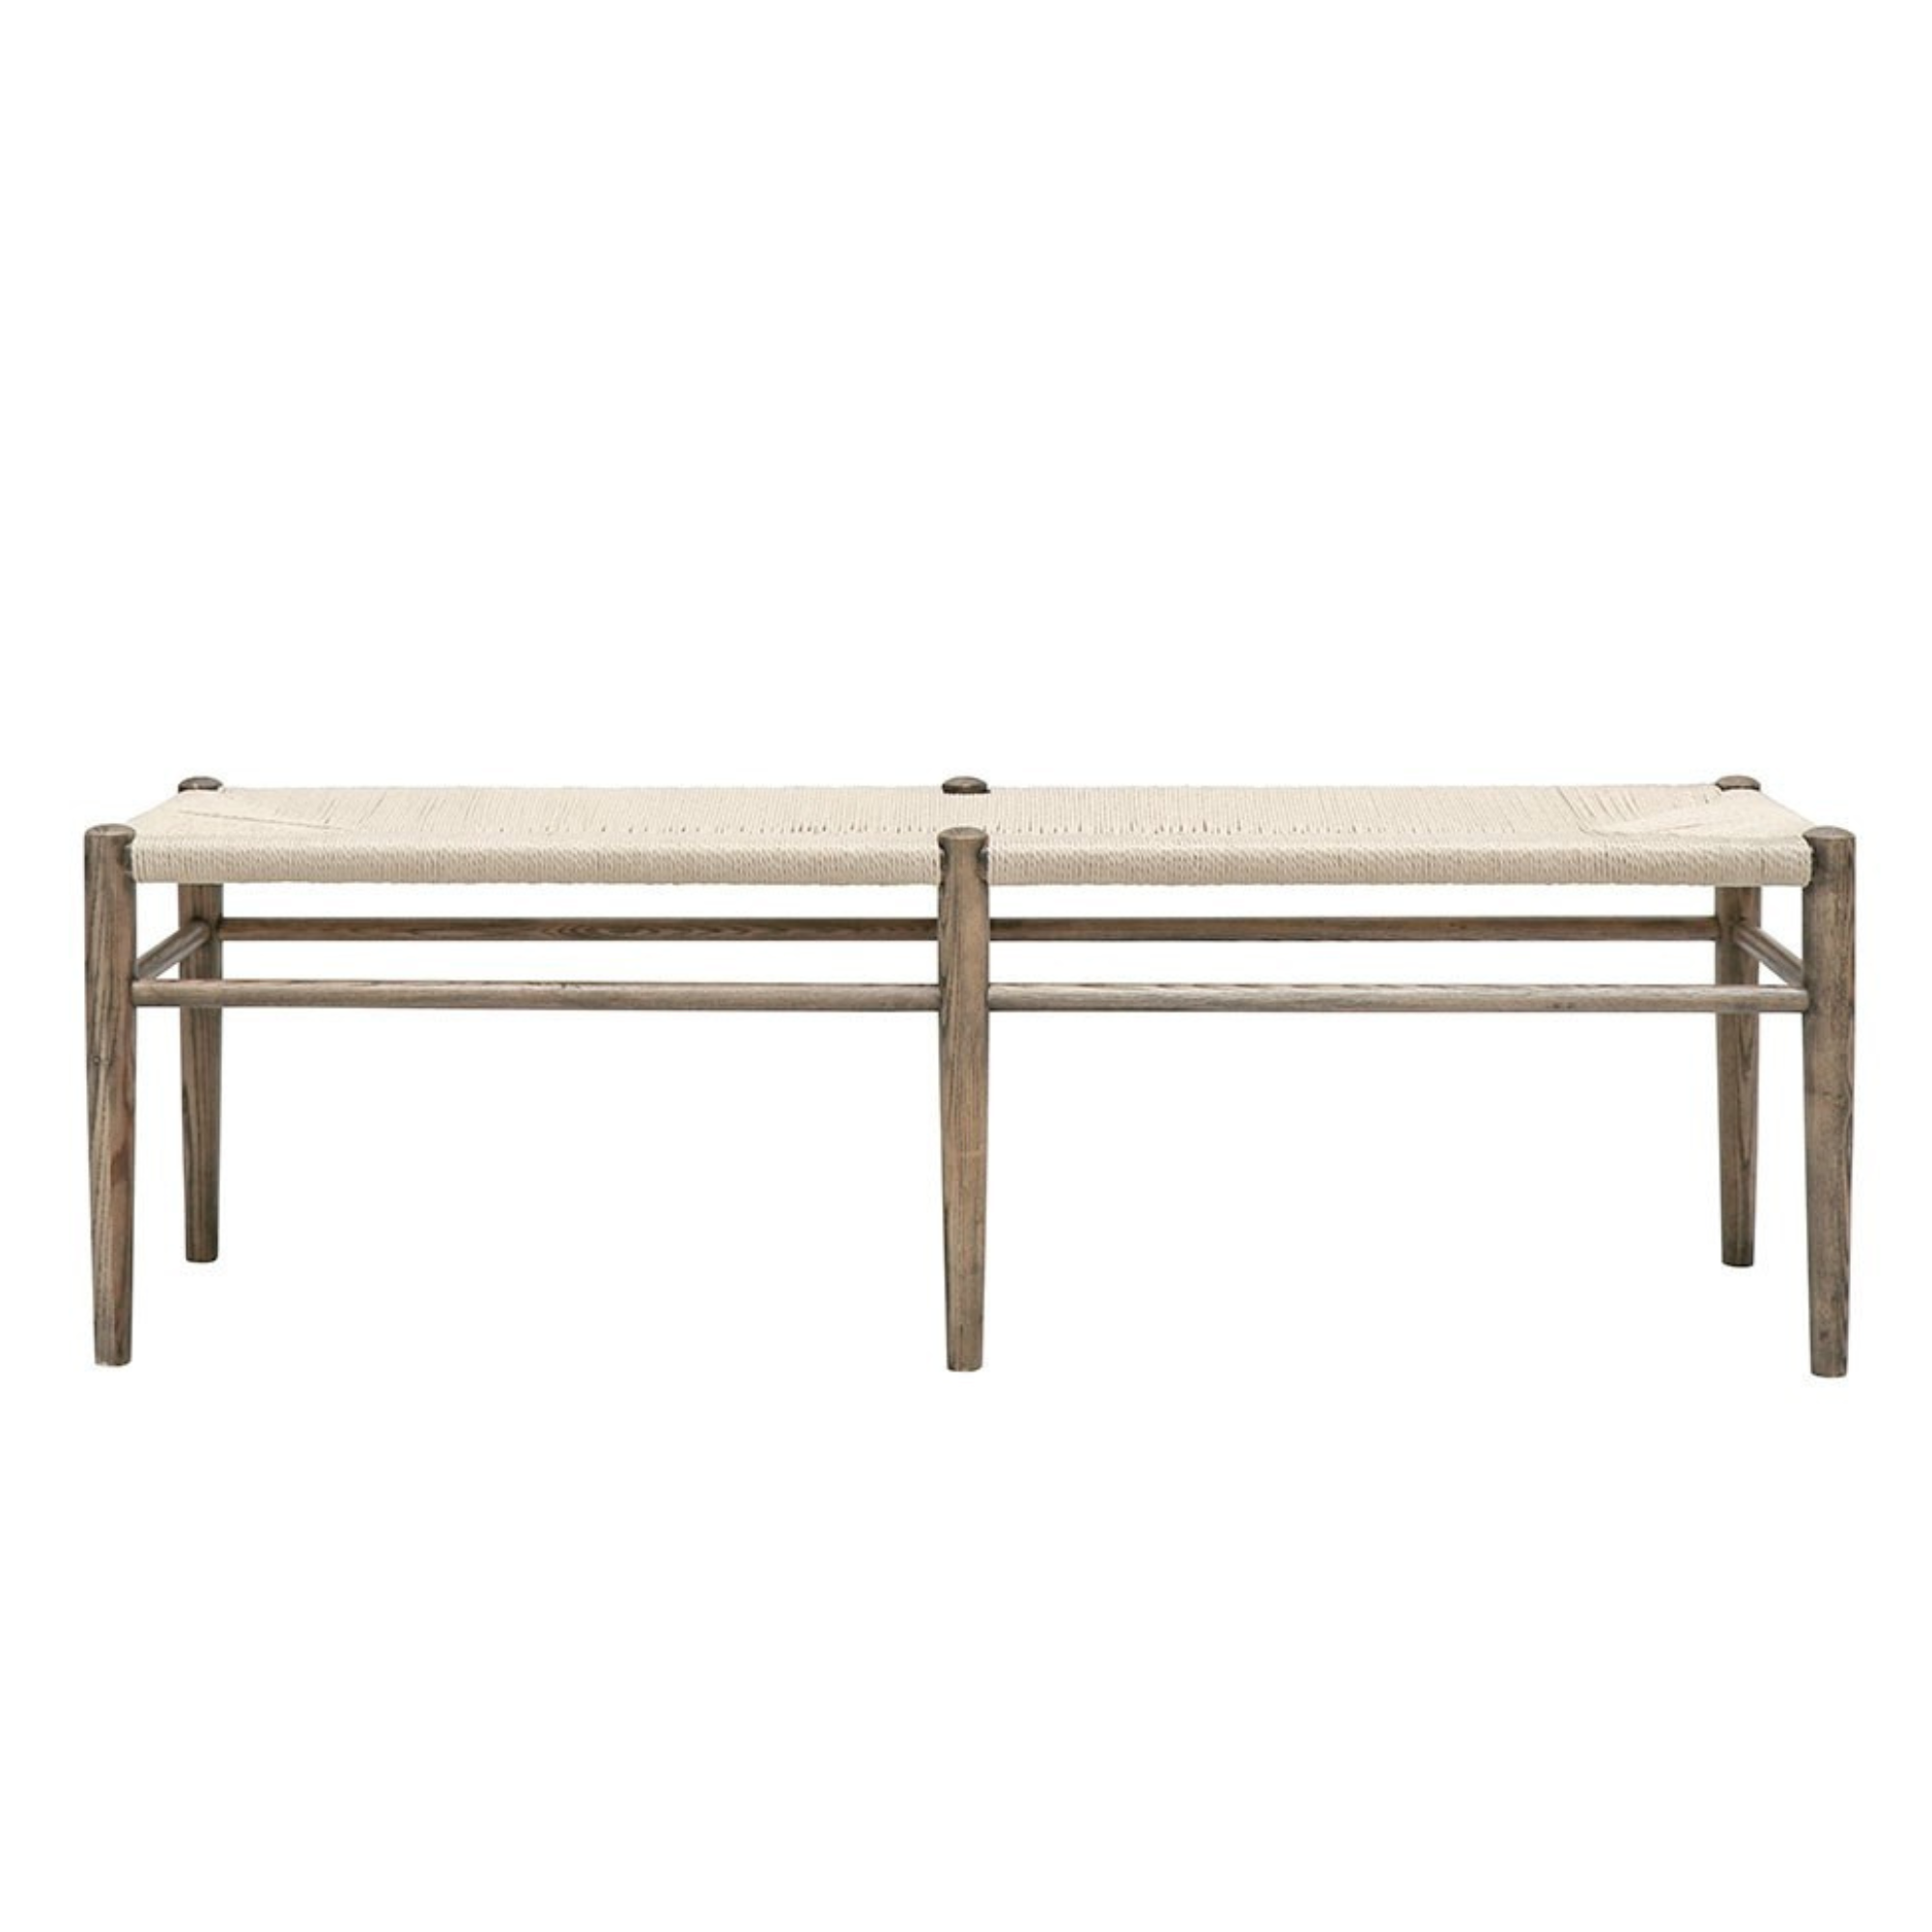 JOFFRE BENCH | NATURAL OR BLACK | 2 SIZES